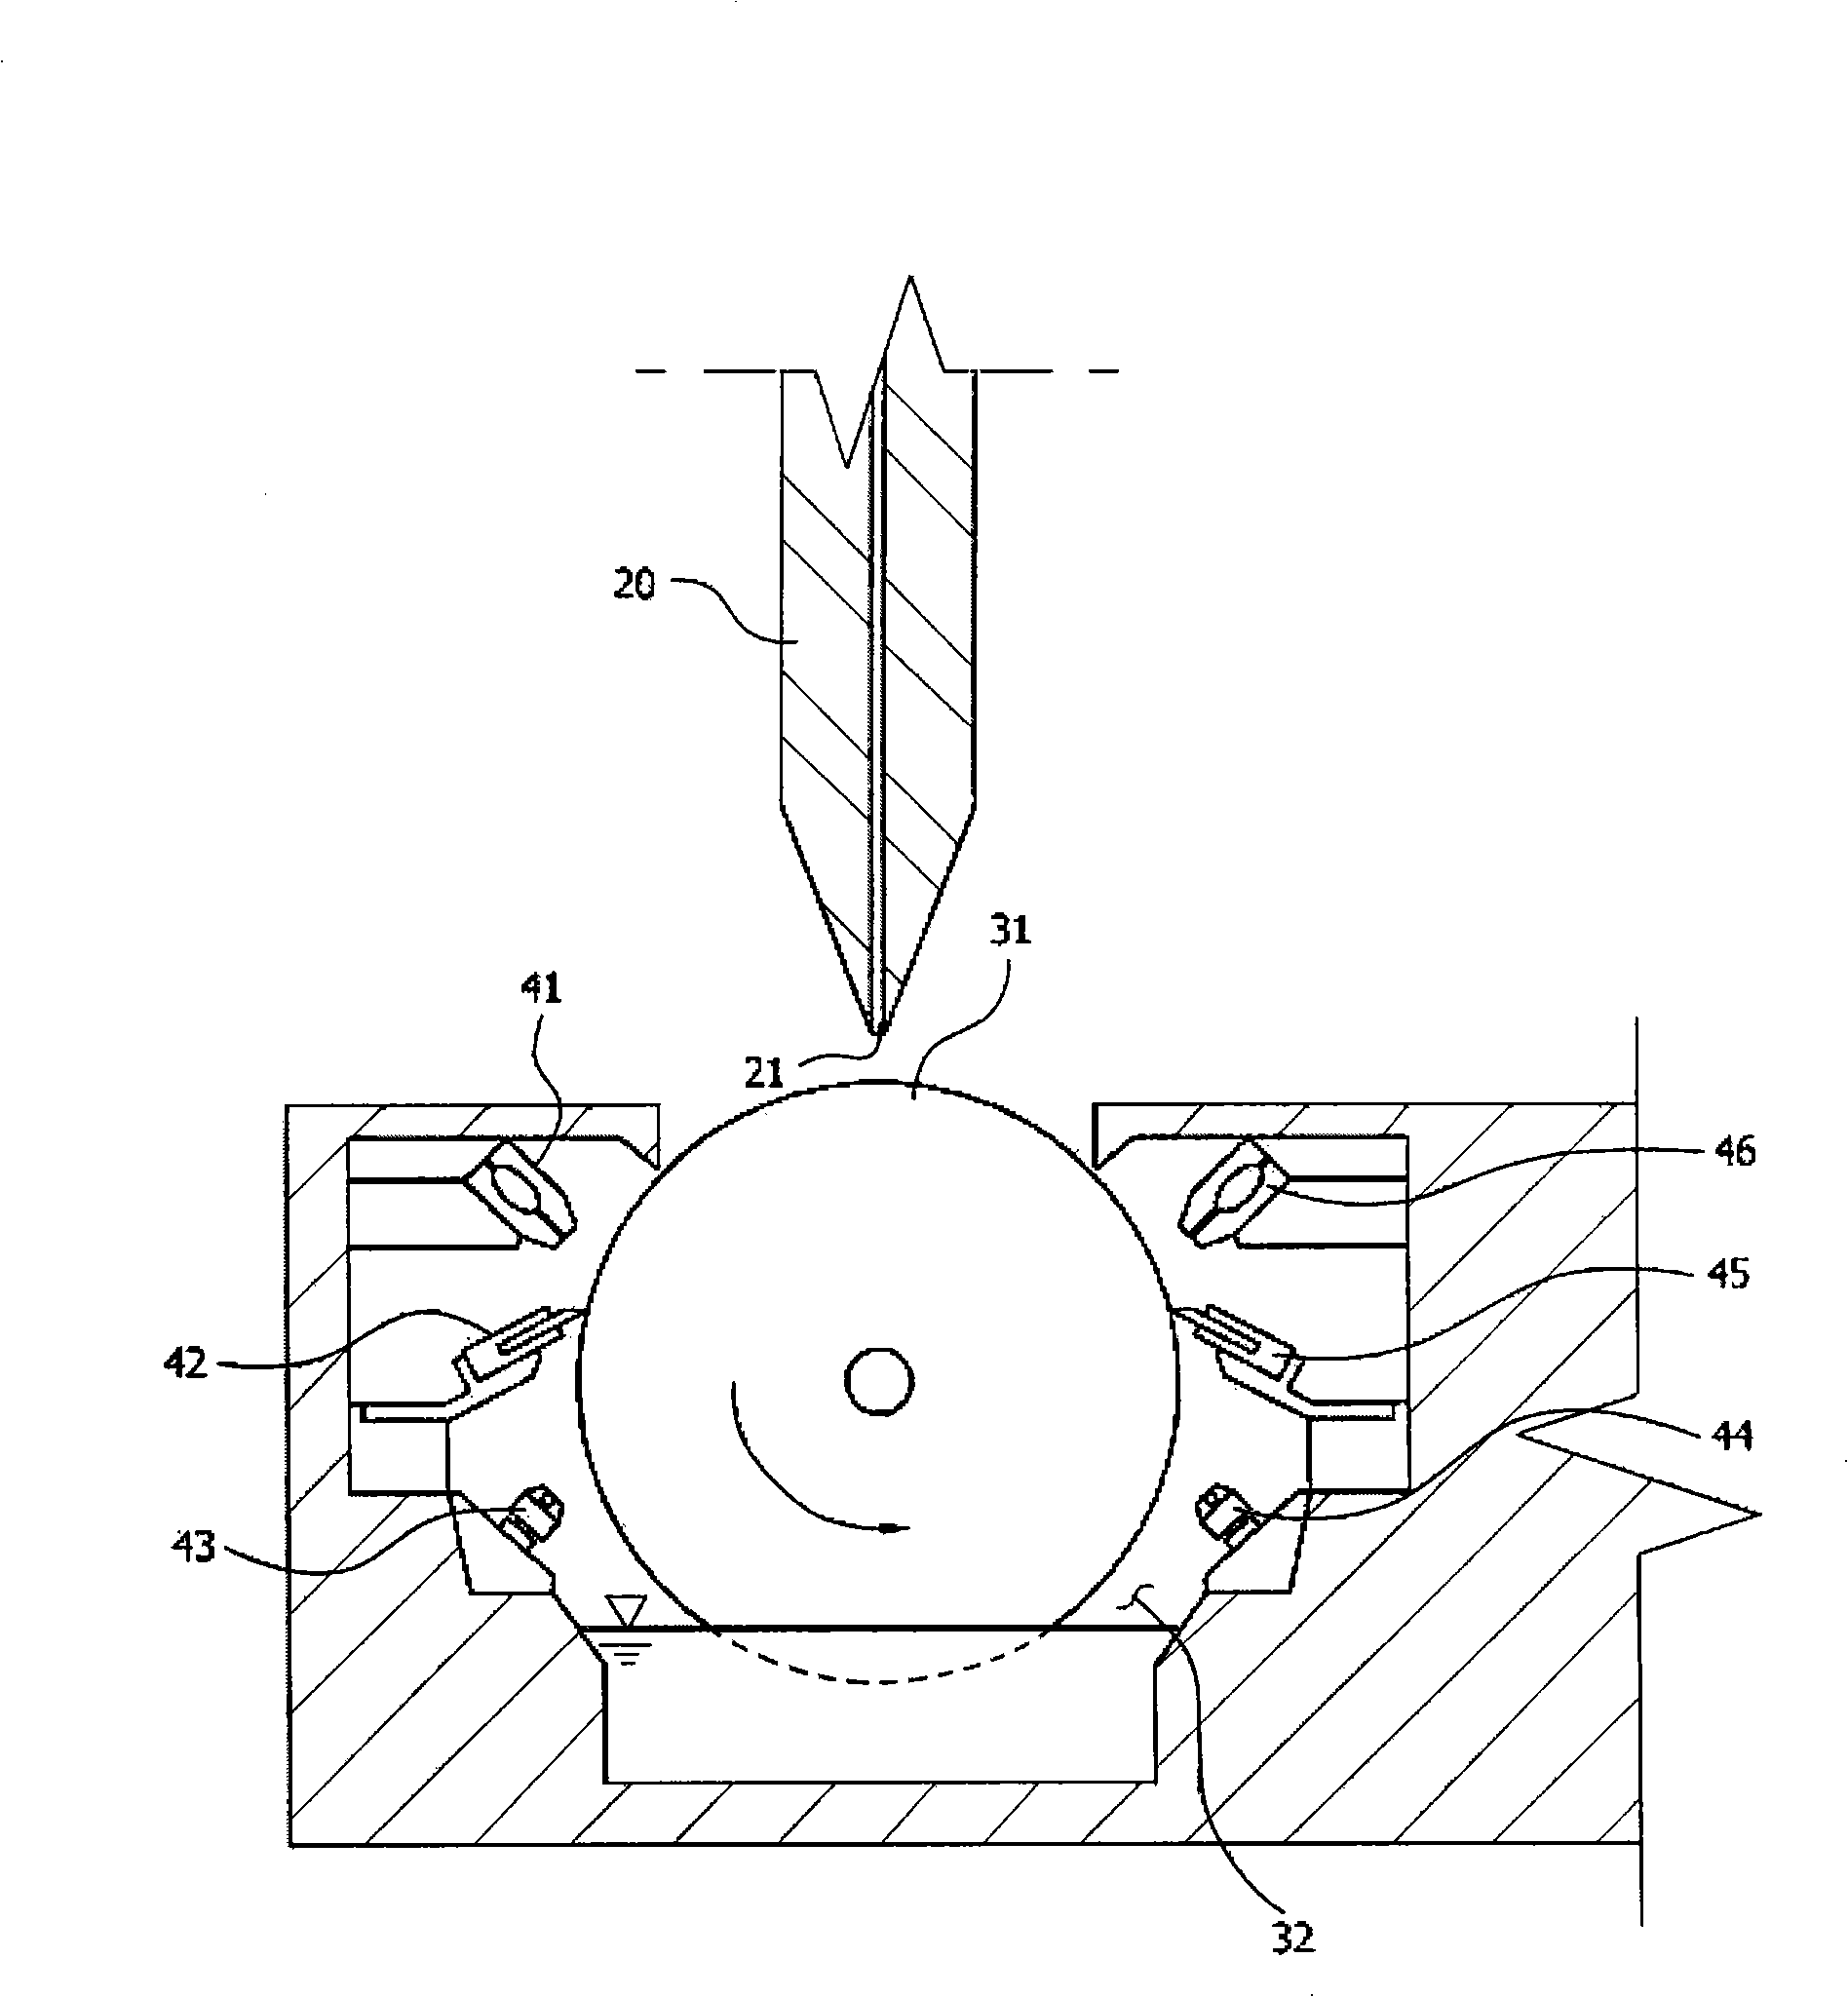 Preparation exhaust device for slit coating machine